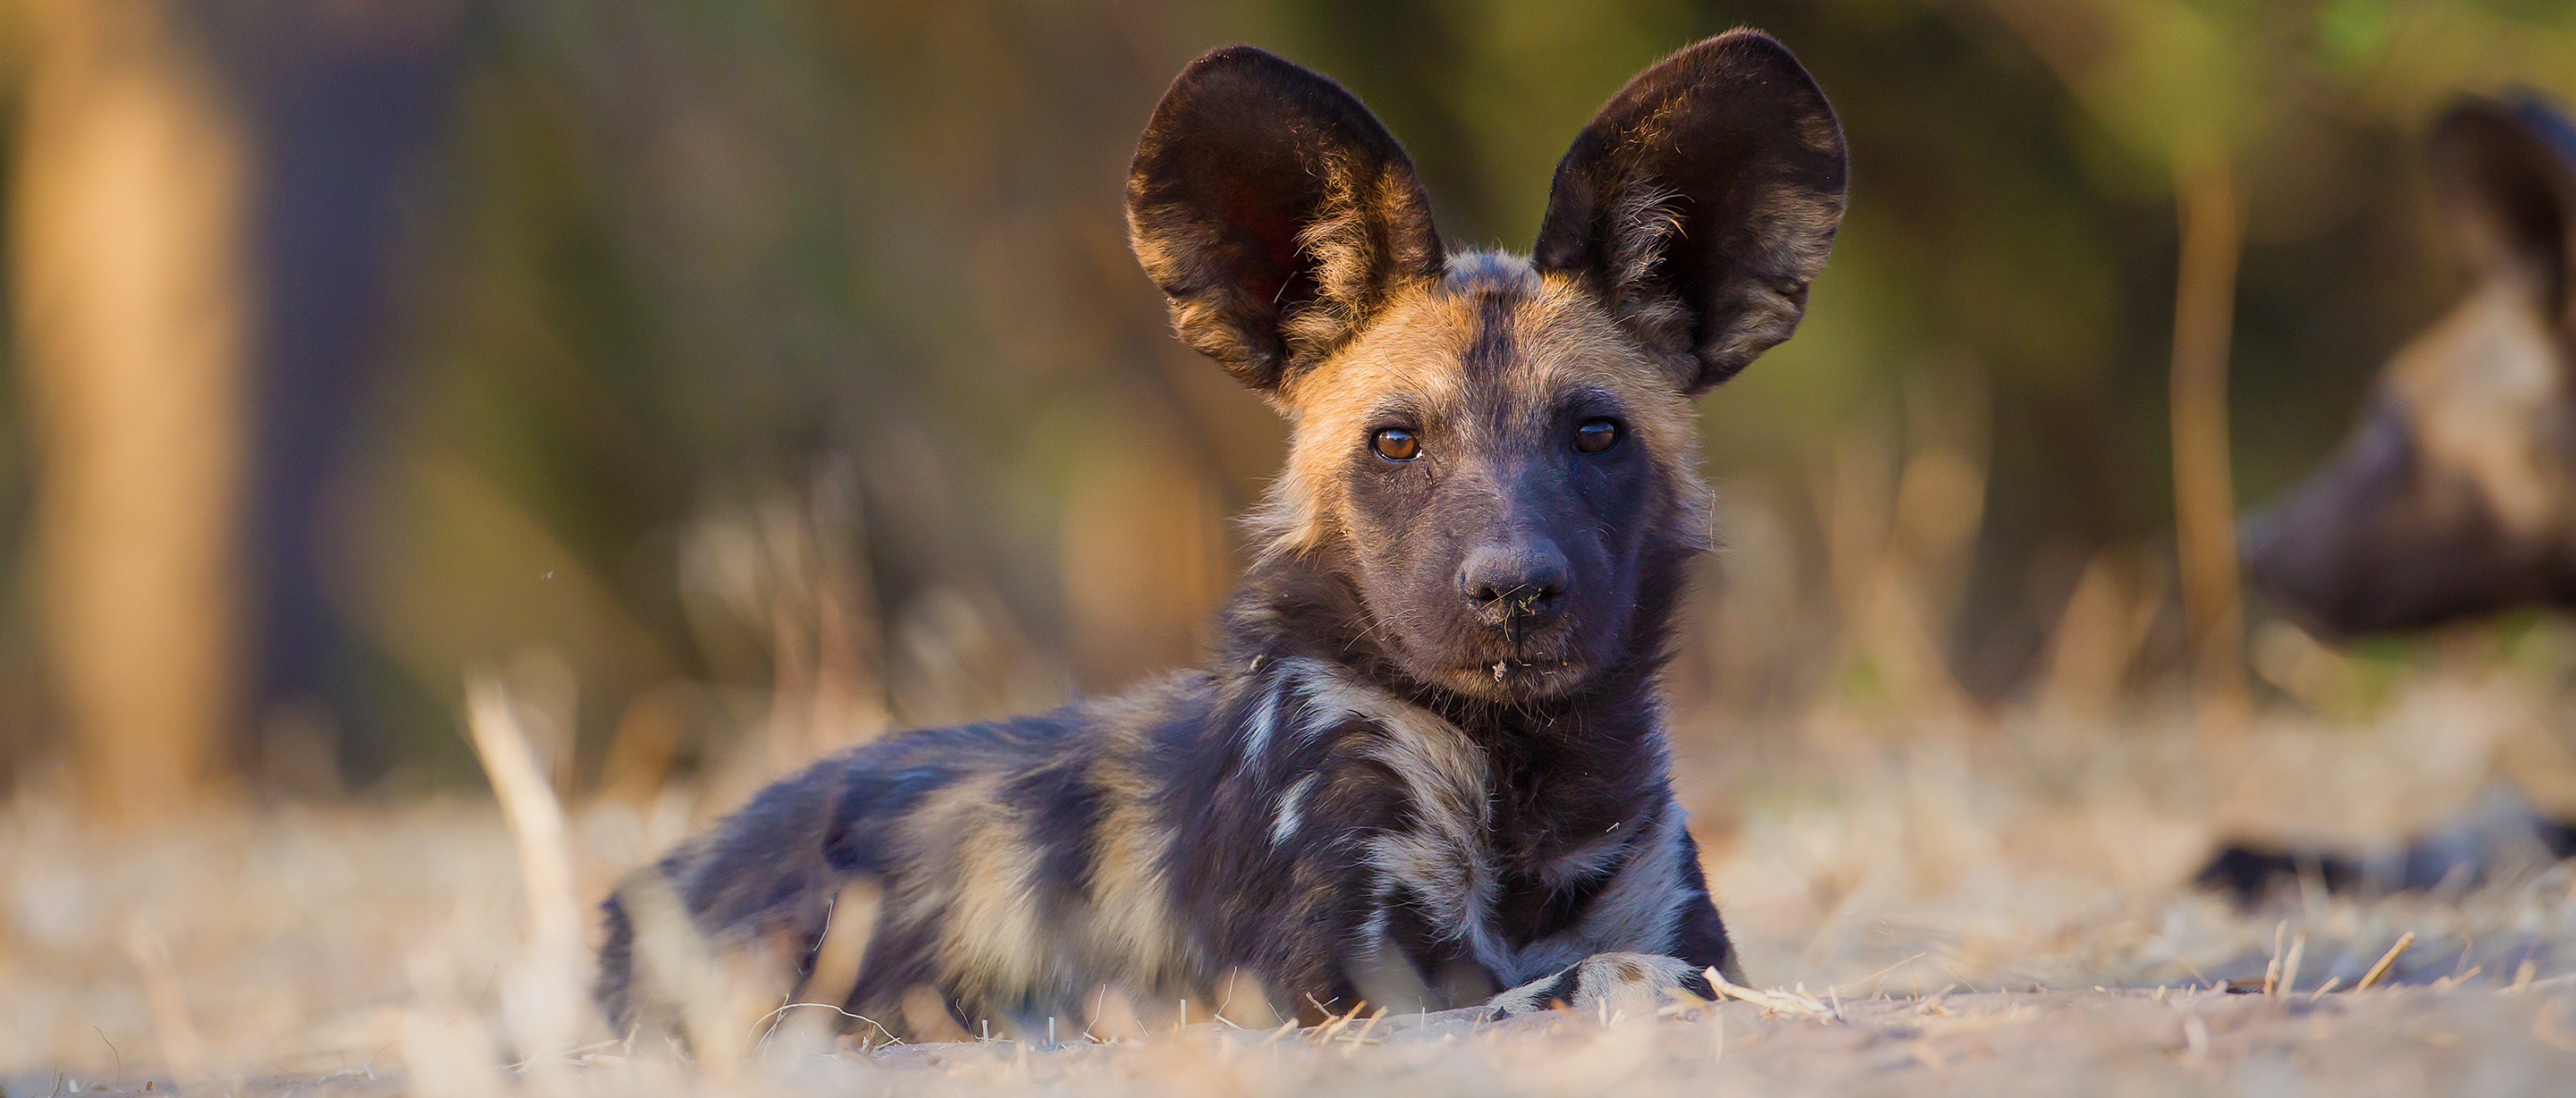 how can we help african wild dogs